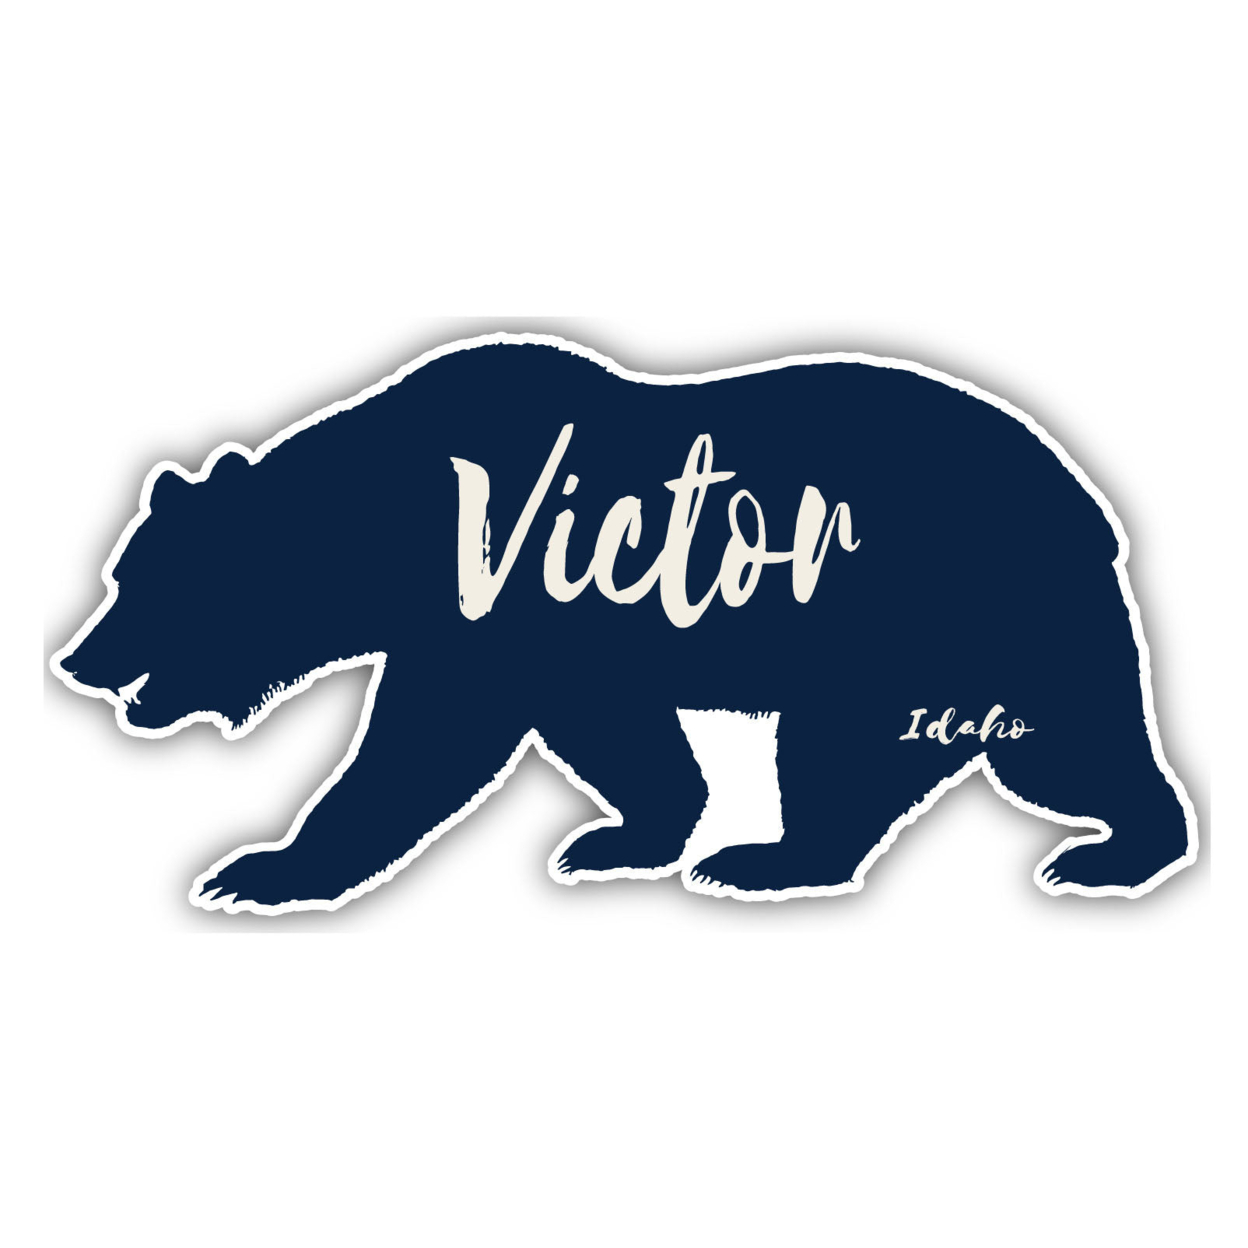 Victor Idaho Souvenir Decorative Stickers (Choose Theme And Size) - Single Unit, 2-Inch, Great Outdoors